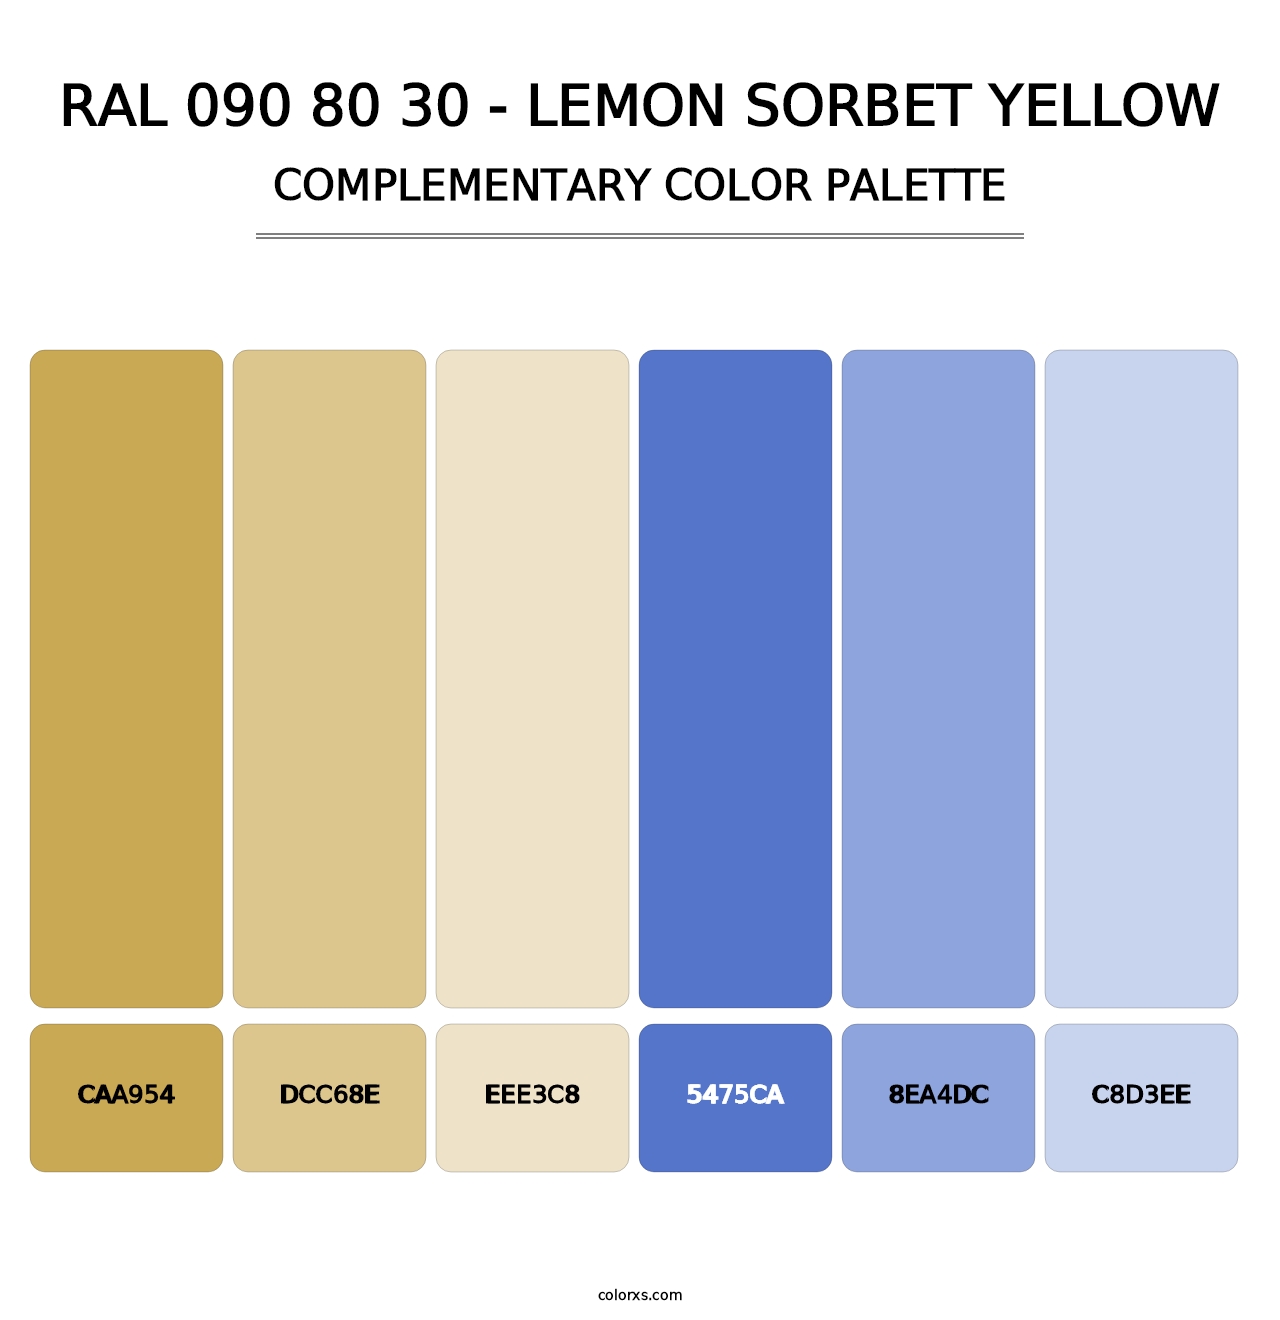 RAL 090 80 30 - Lemon Sorbet Yellow - Complementary Color Palette